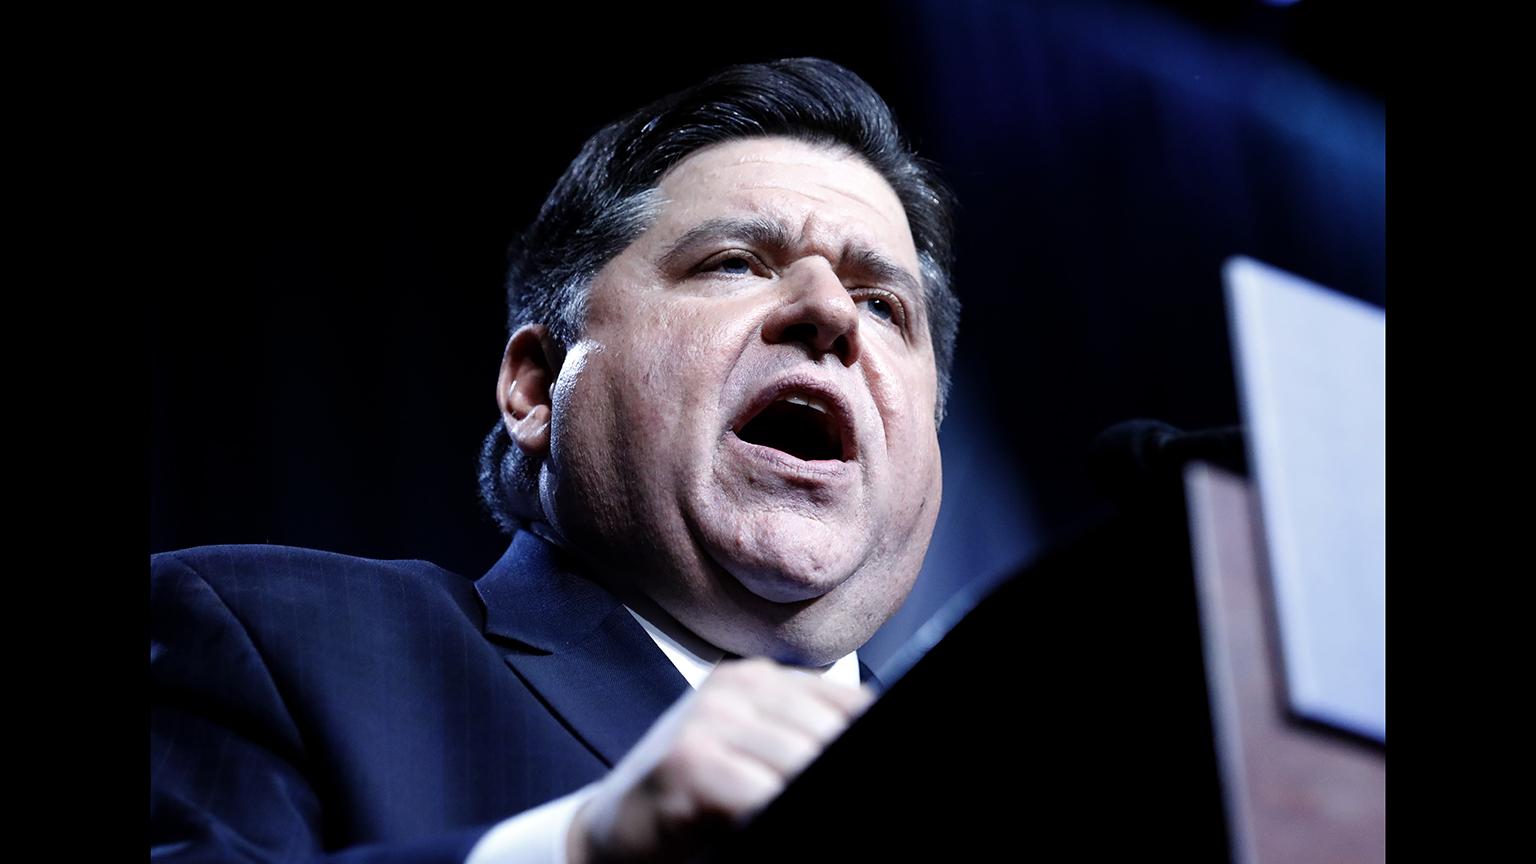 In this Nov. 6, 2018 file photo, Democratic gubernatorial candidate J.B. Pritzker speaks after he is elected over Republican incumbent Bruce Rauner. (AP Photo / Nam Y. Huh)